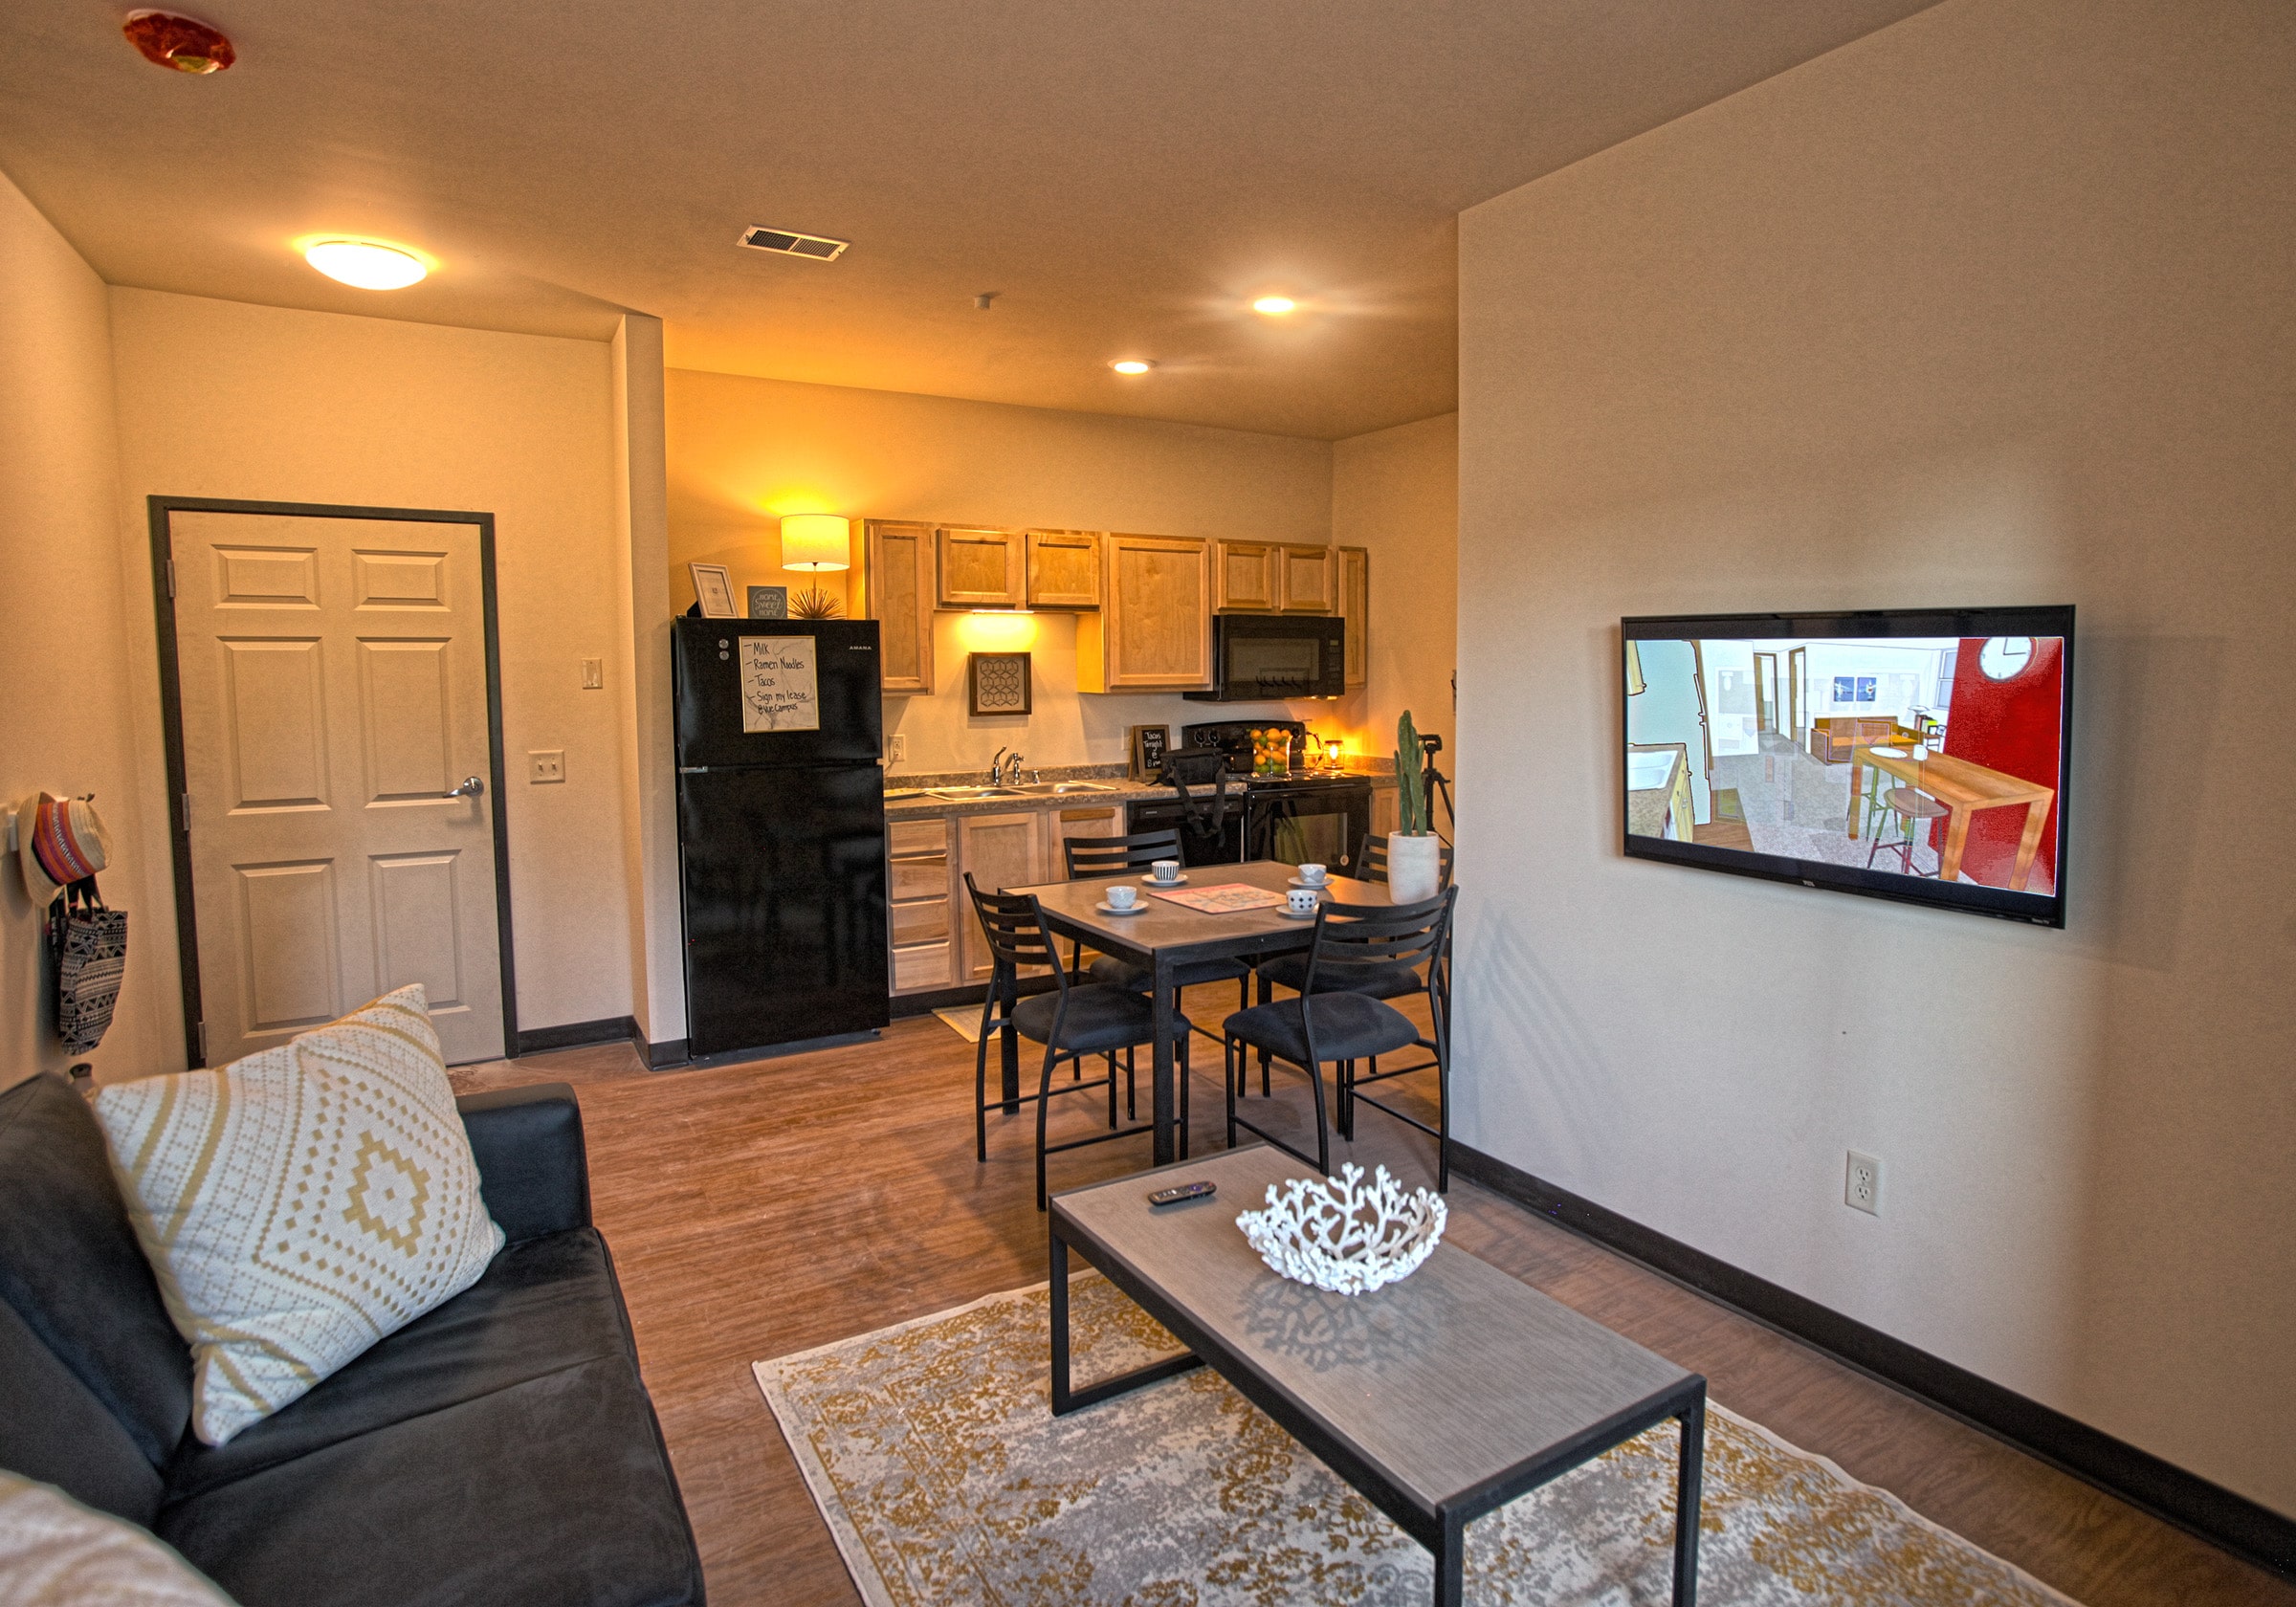 Inside view of Vue campus room with kitchen and living room